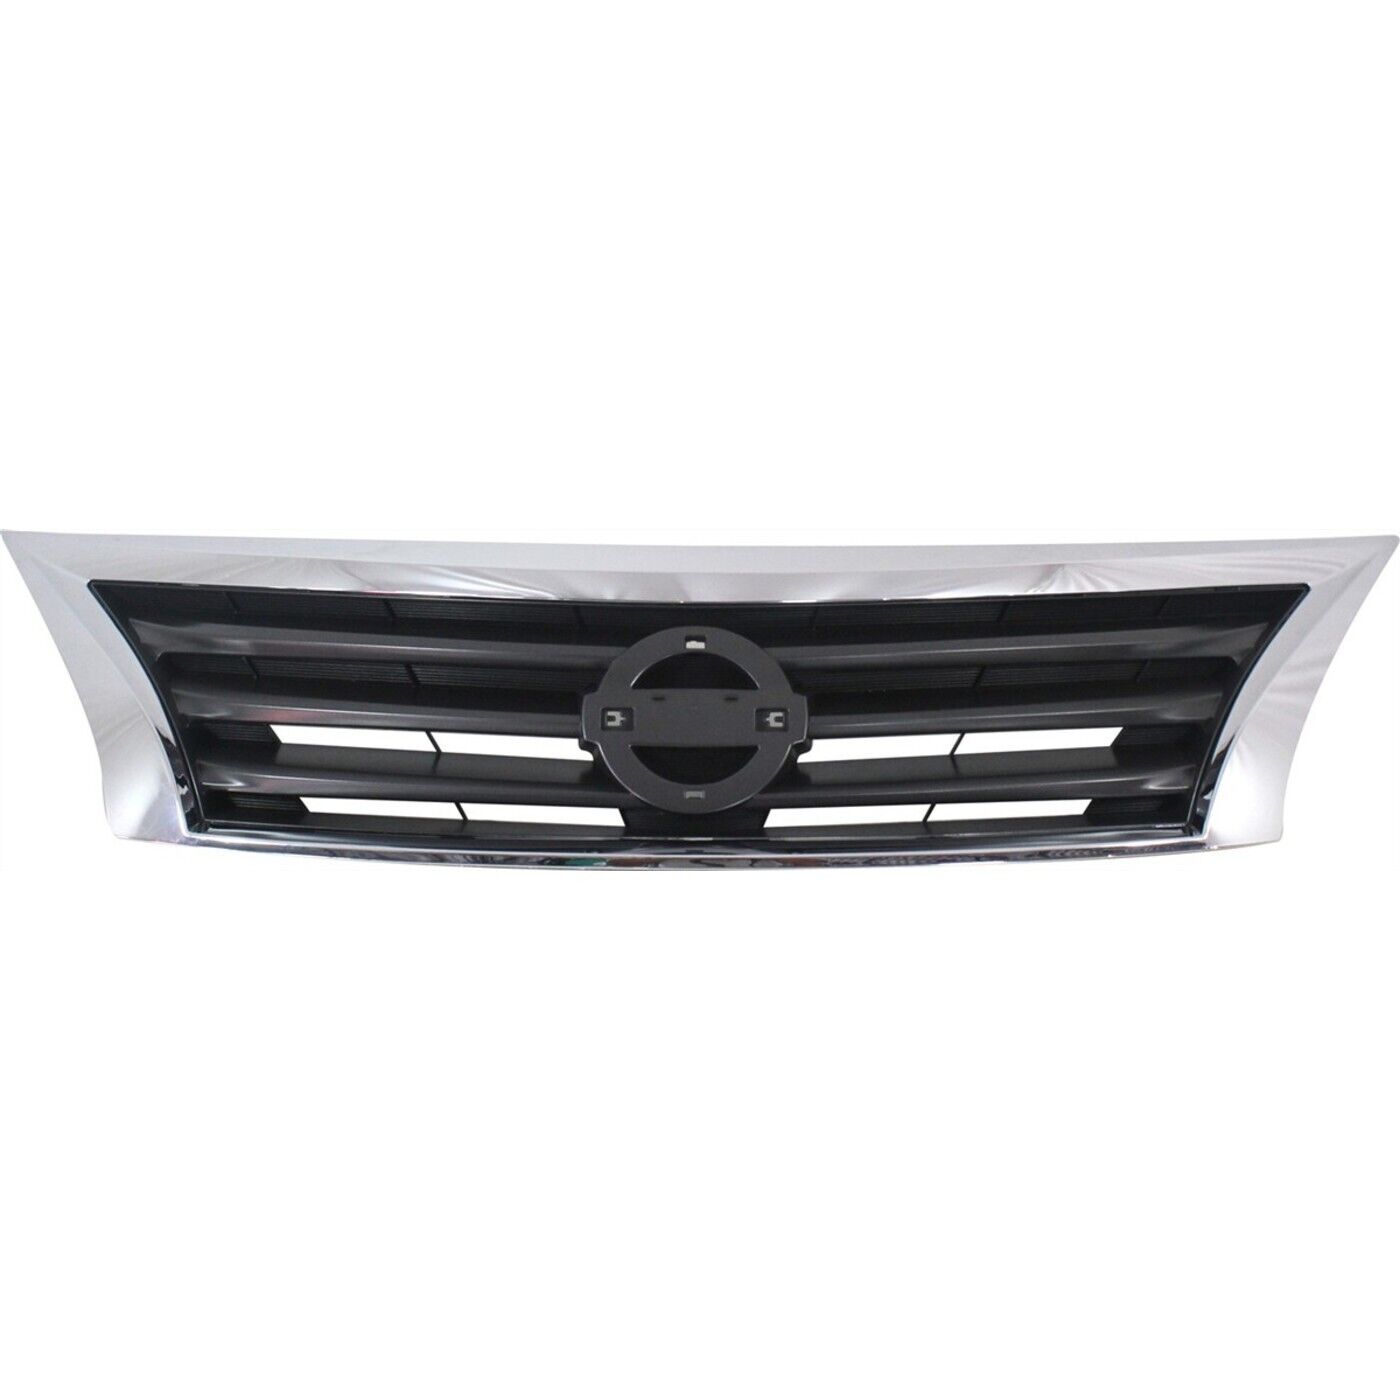 Front Upper Bumper Mounted Grille For 2013-2015 Nissan Altima Chrome Sheell